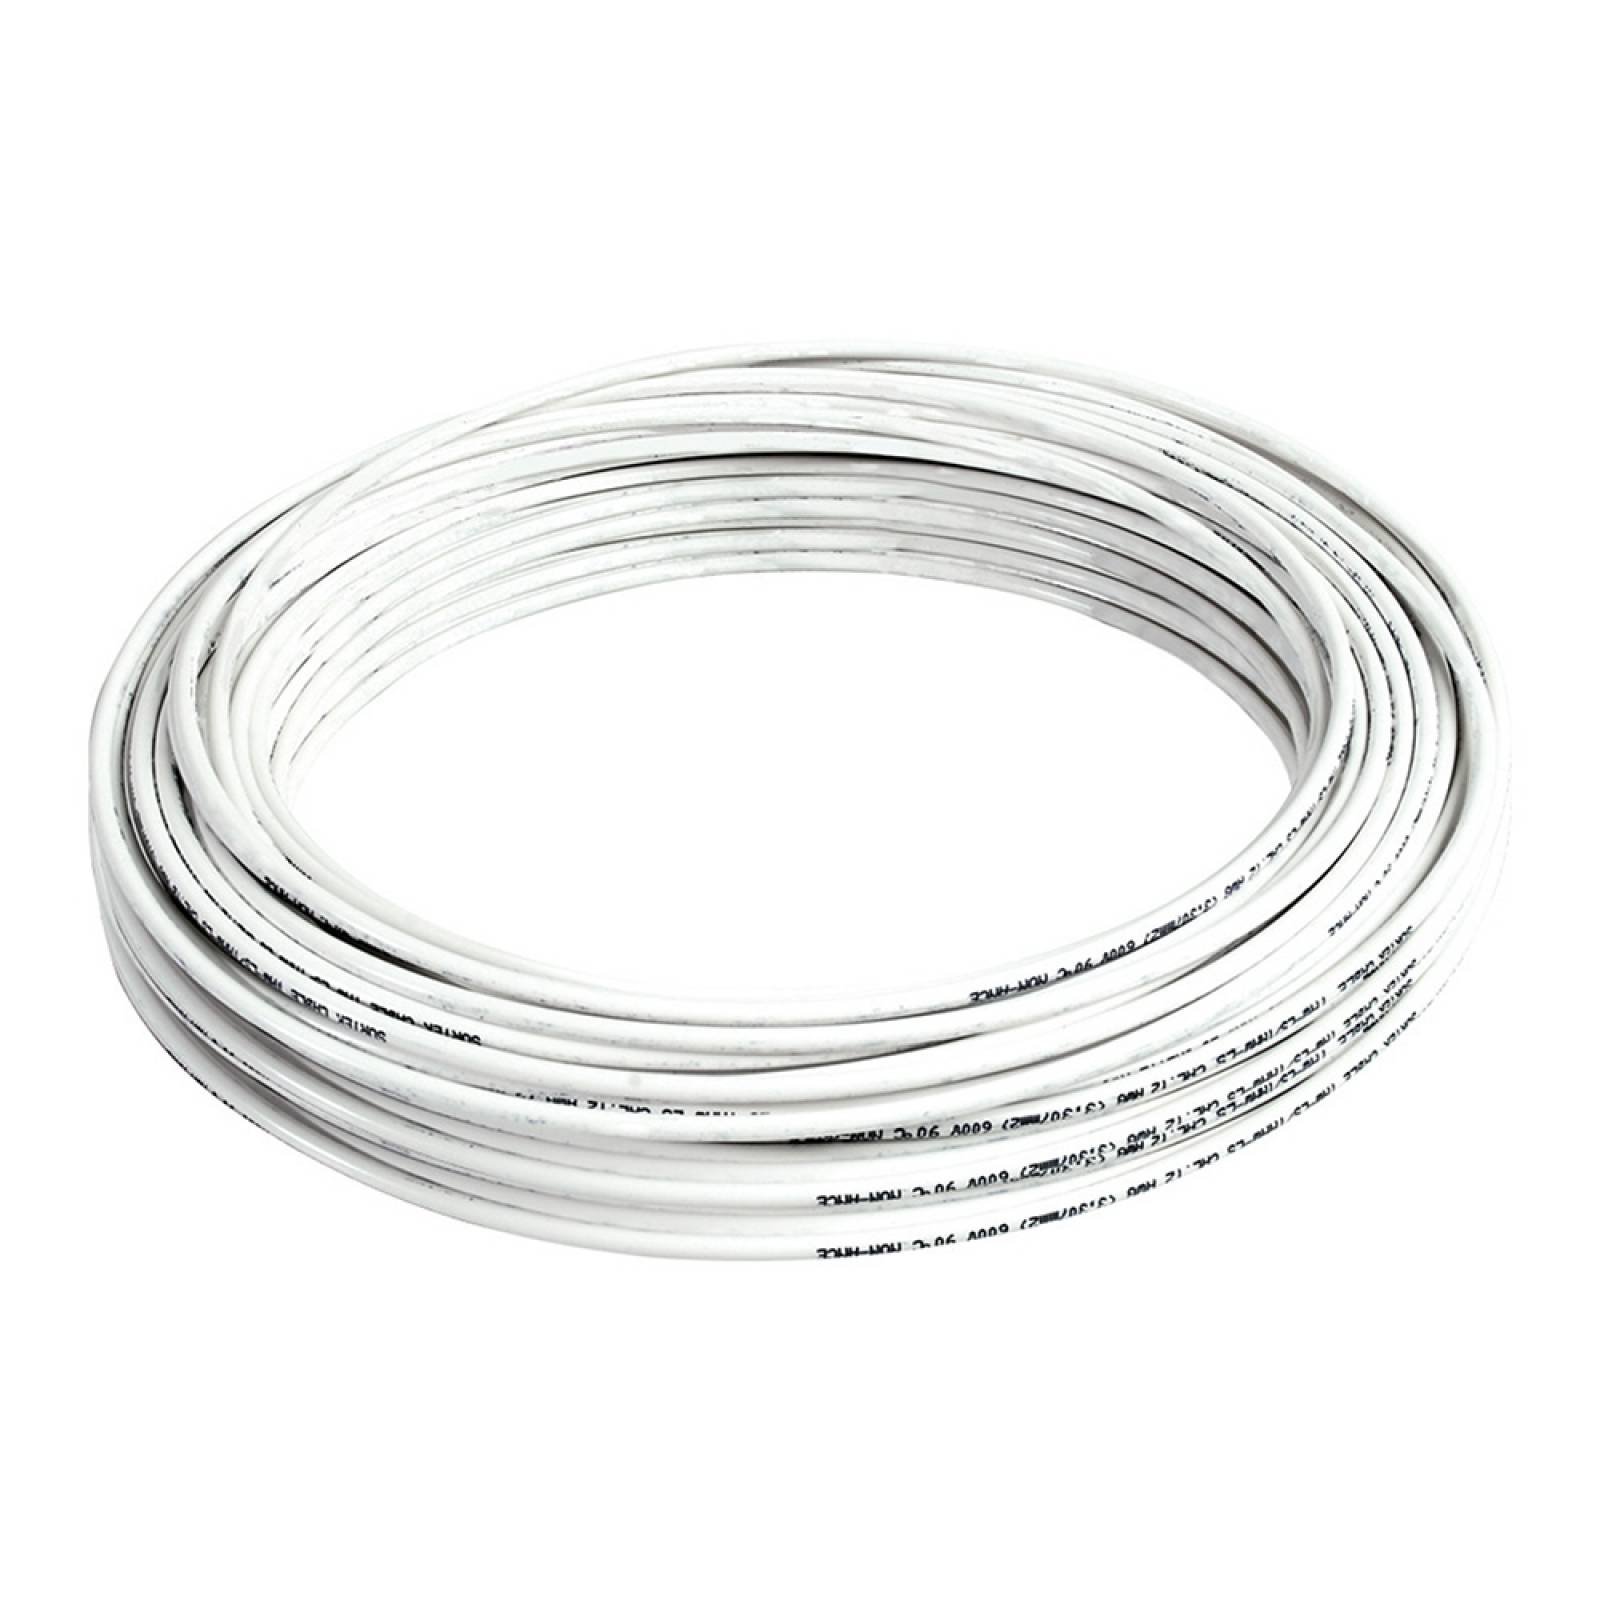 Cable Eléctrico Tipo Thw-ls/thhw-ls Cal14 100m Blanco 136925 